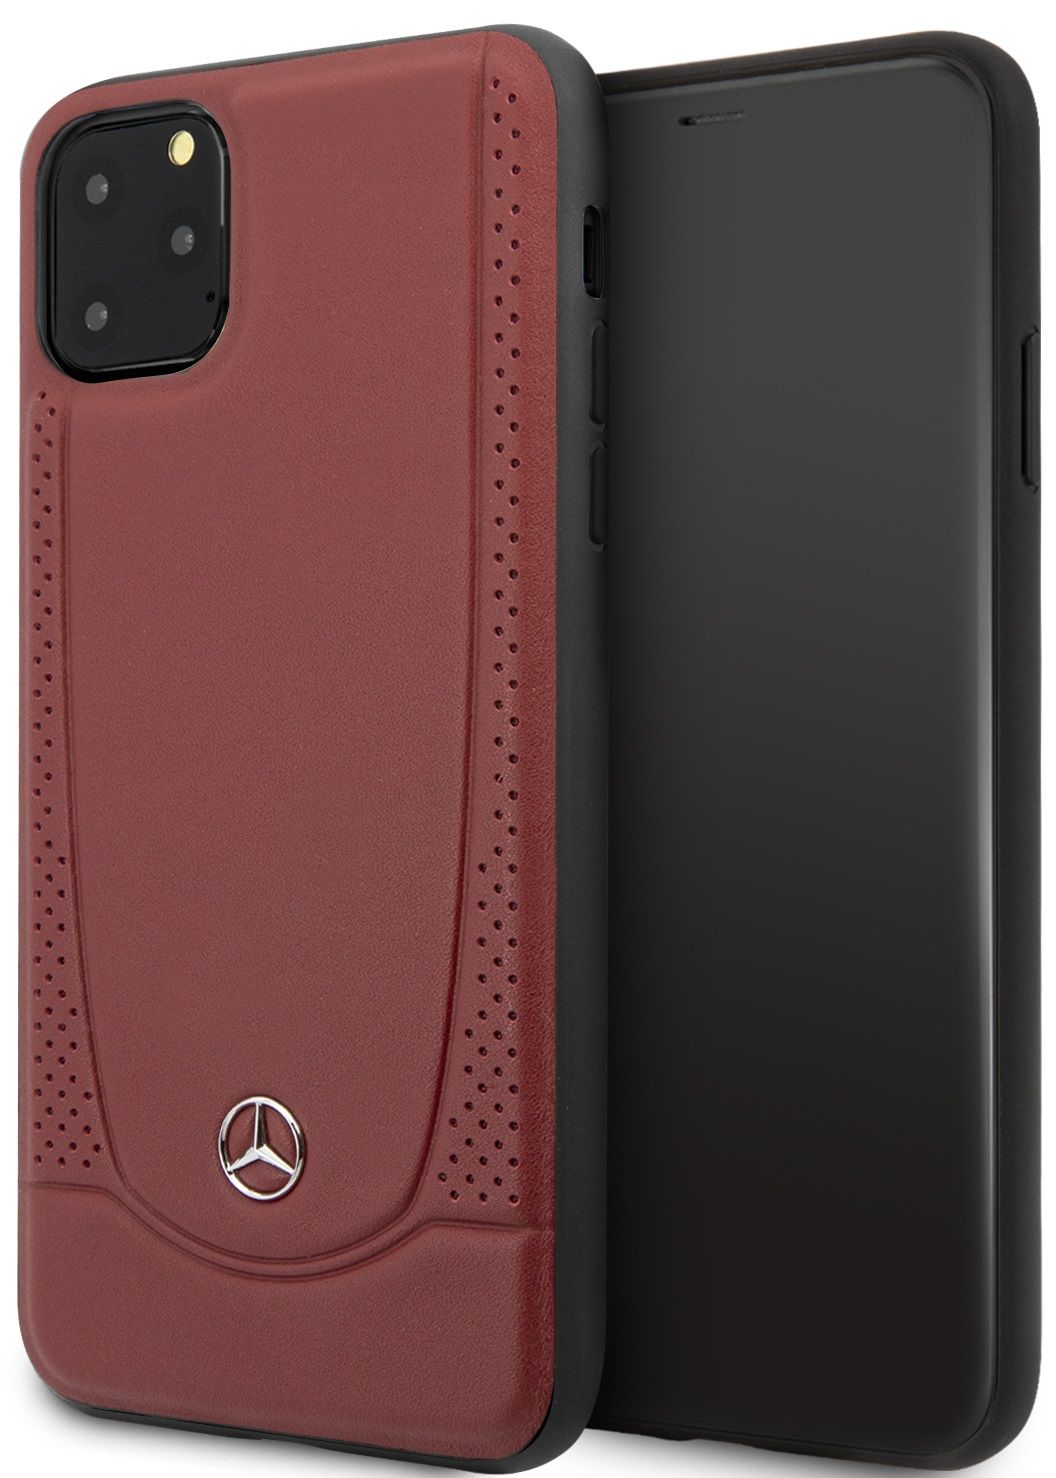 Чехол Mercedes для iPhone 11 Pro Max Urban Smooth/perforated Hard Leather Red